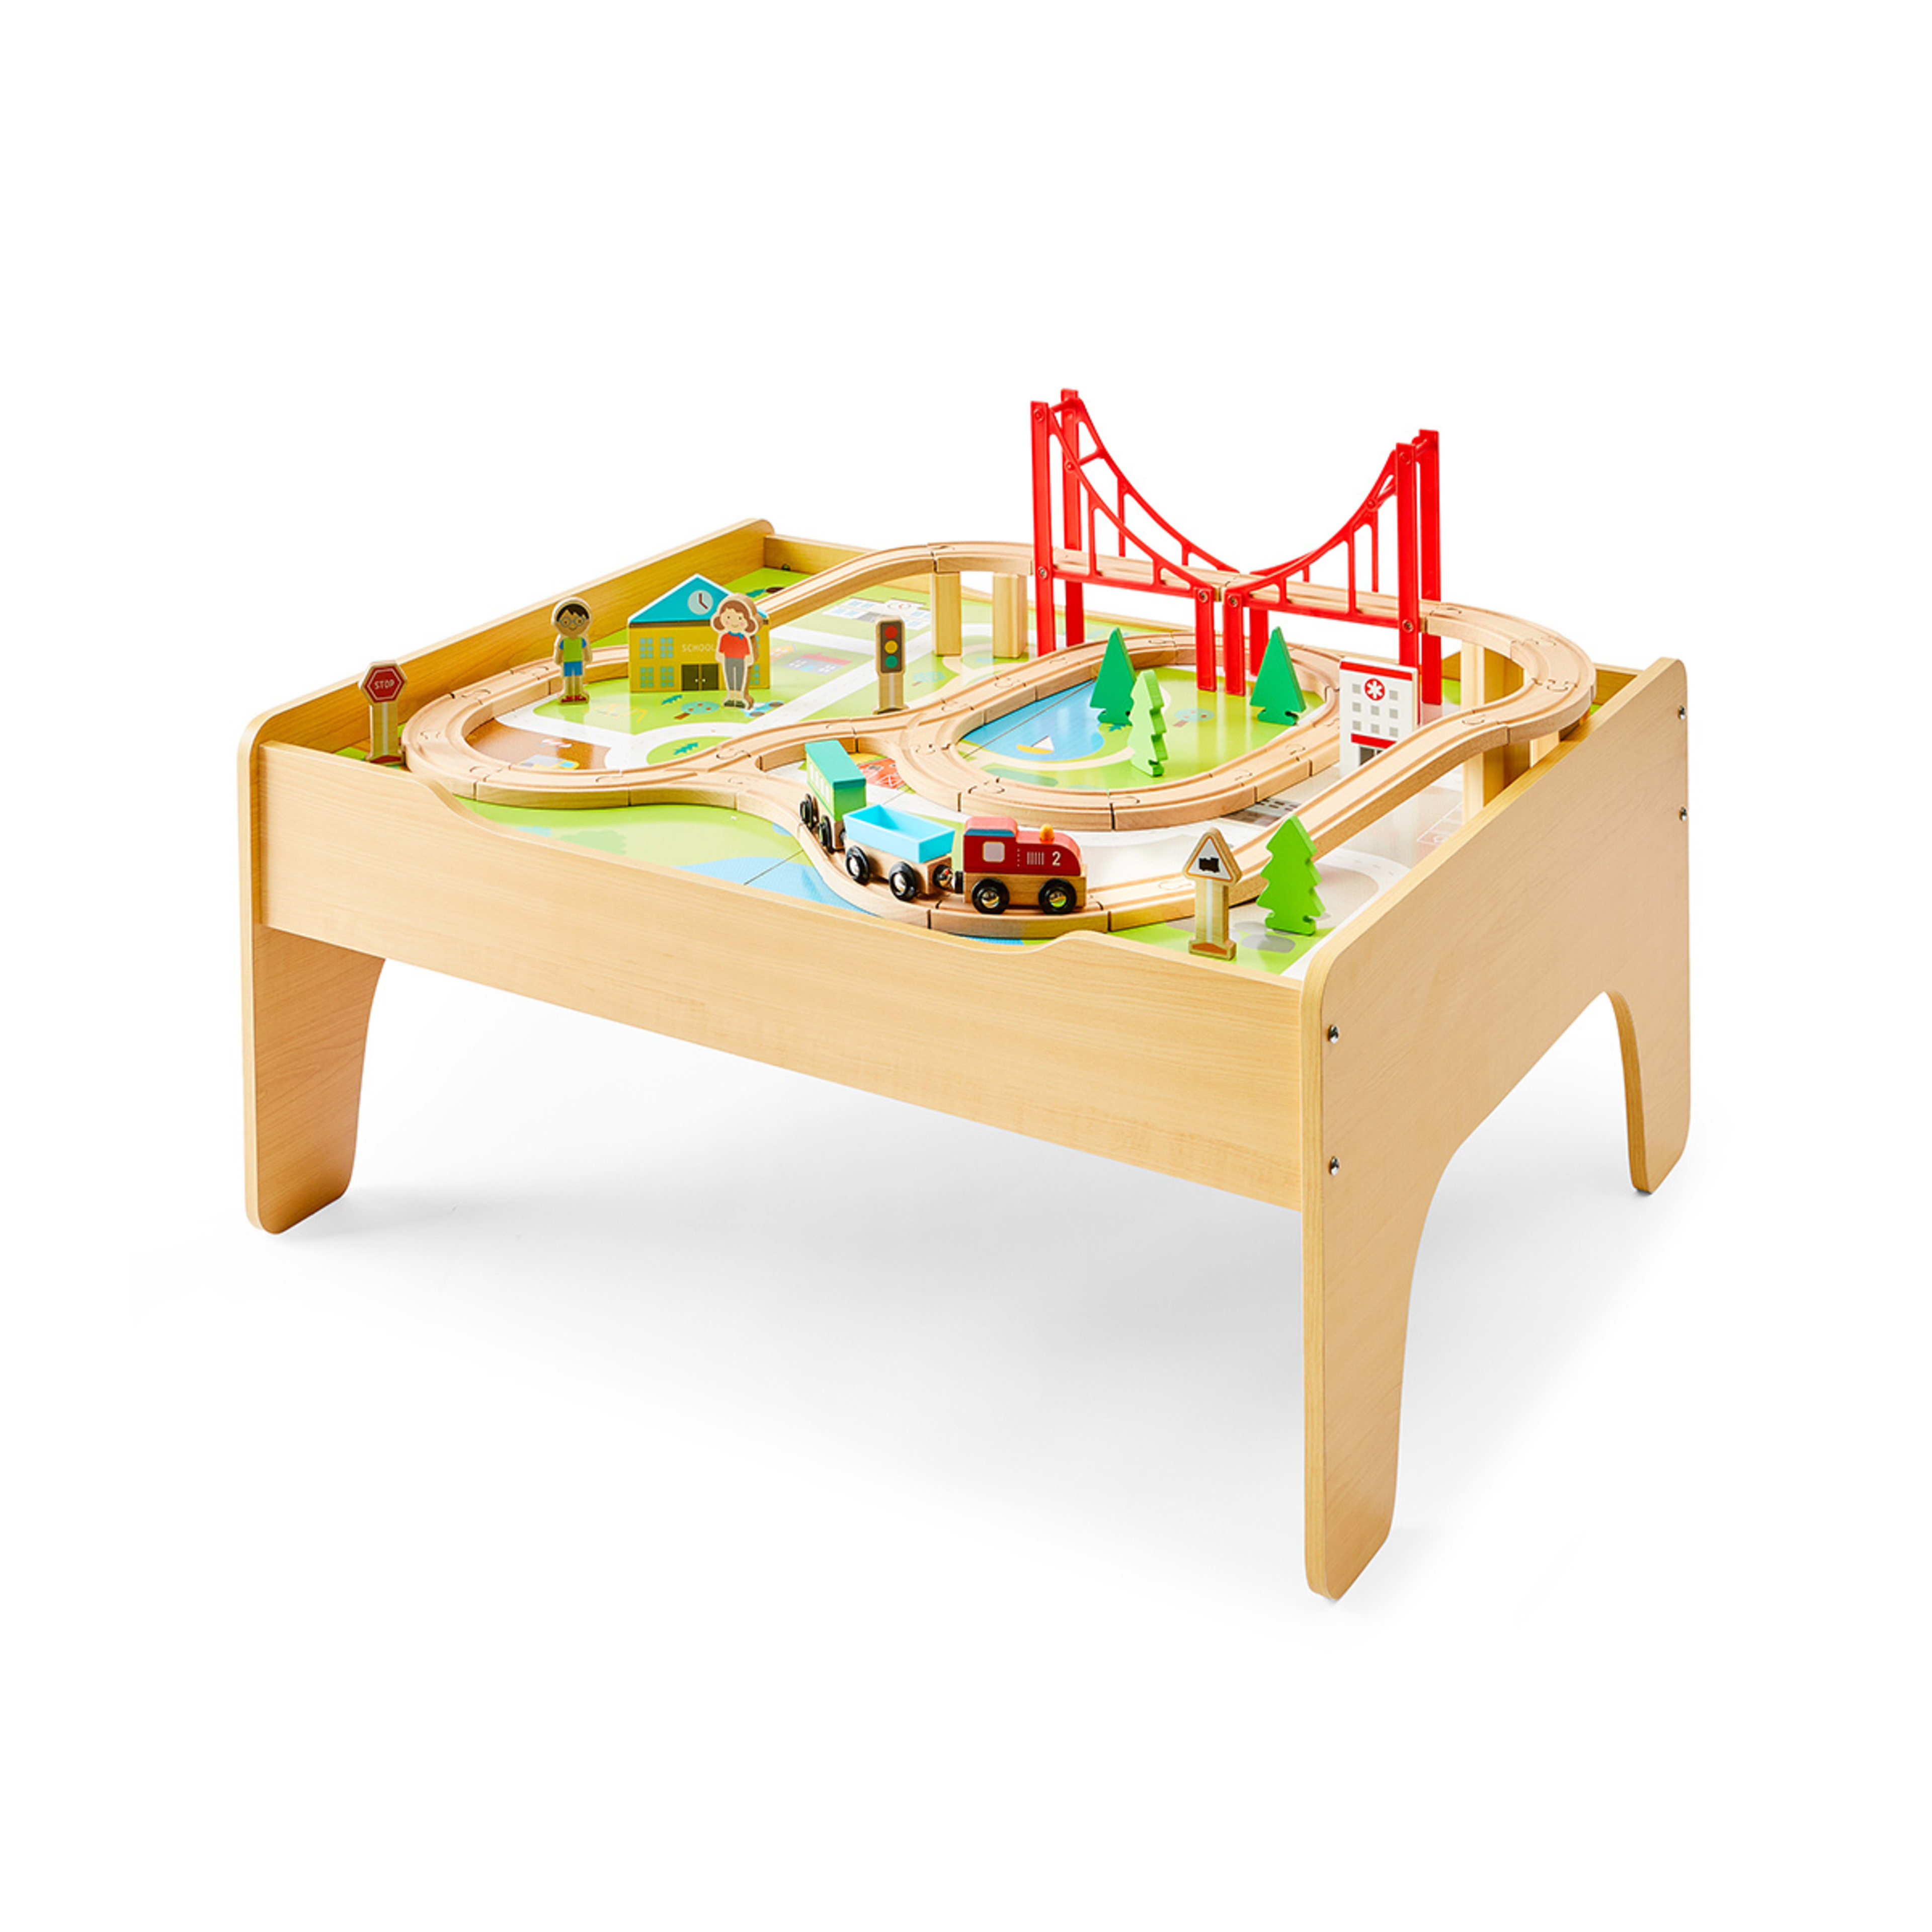 Wooden Train Table with Storage - Kmart